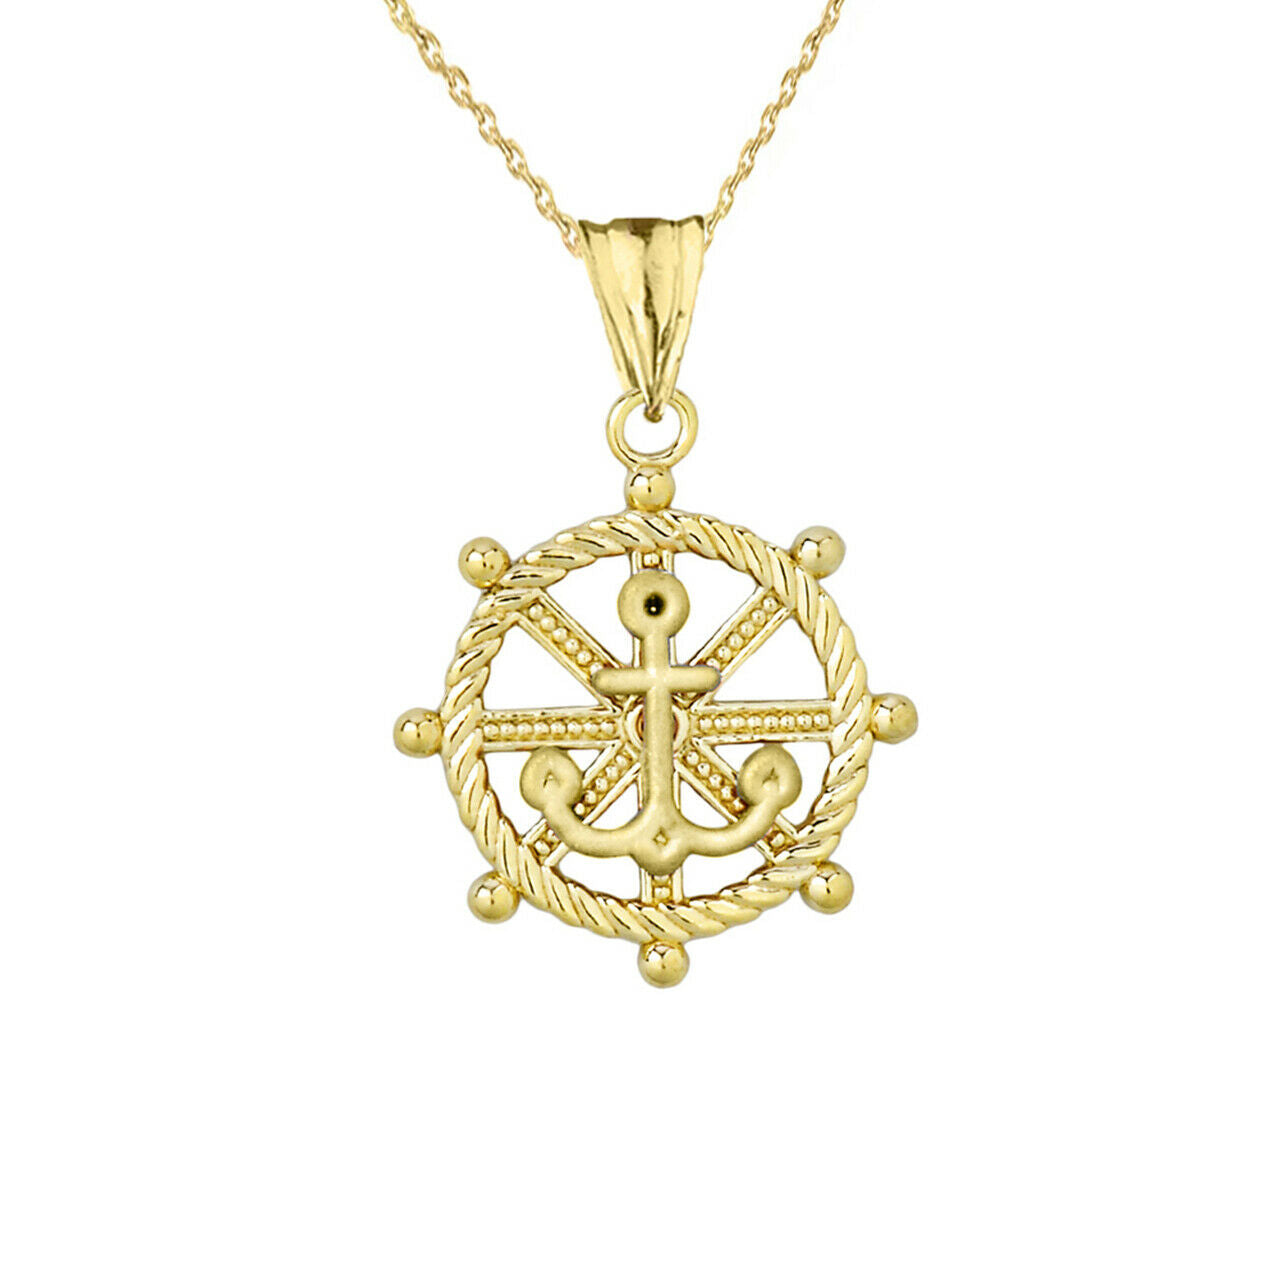 14K Solid Yellow Gold Anchor with Roped Helm Pendant Necklace